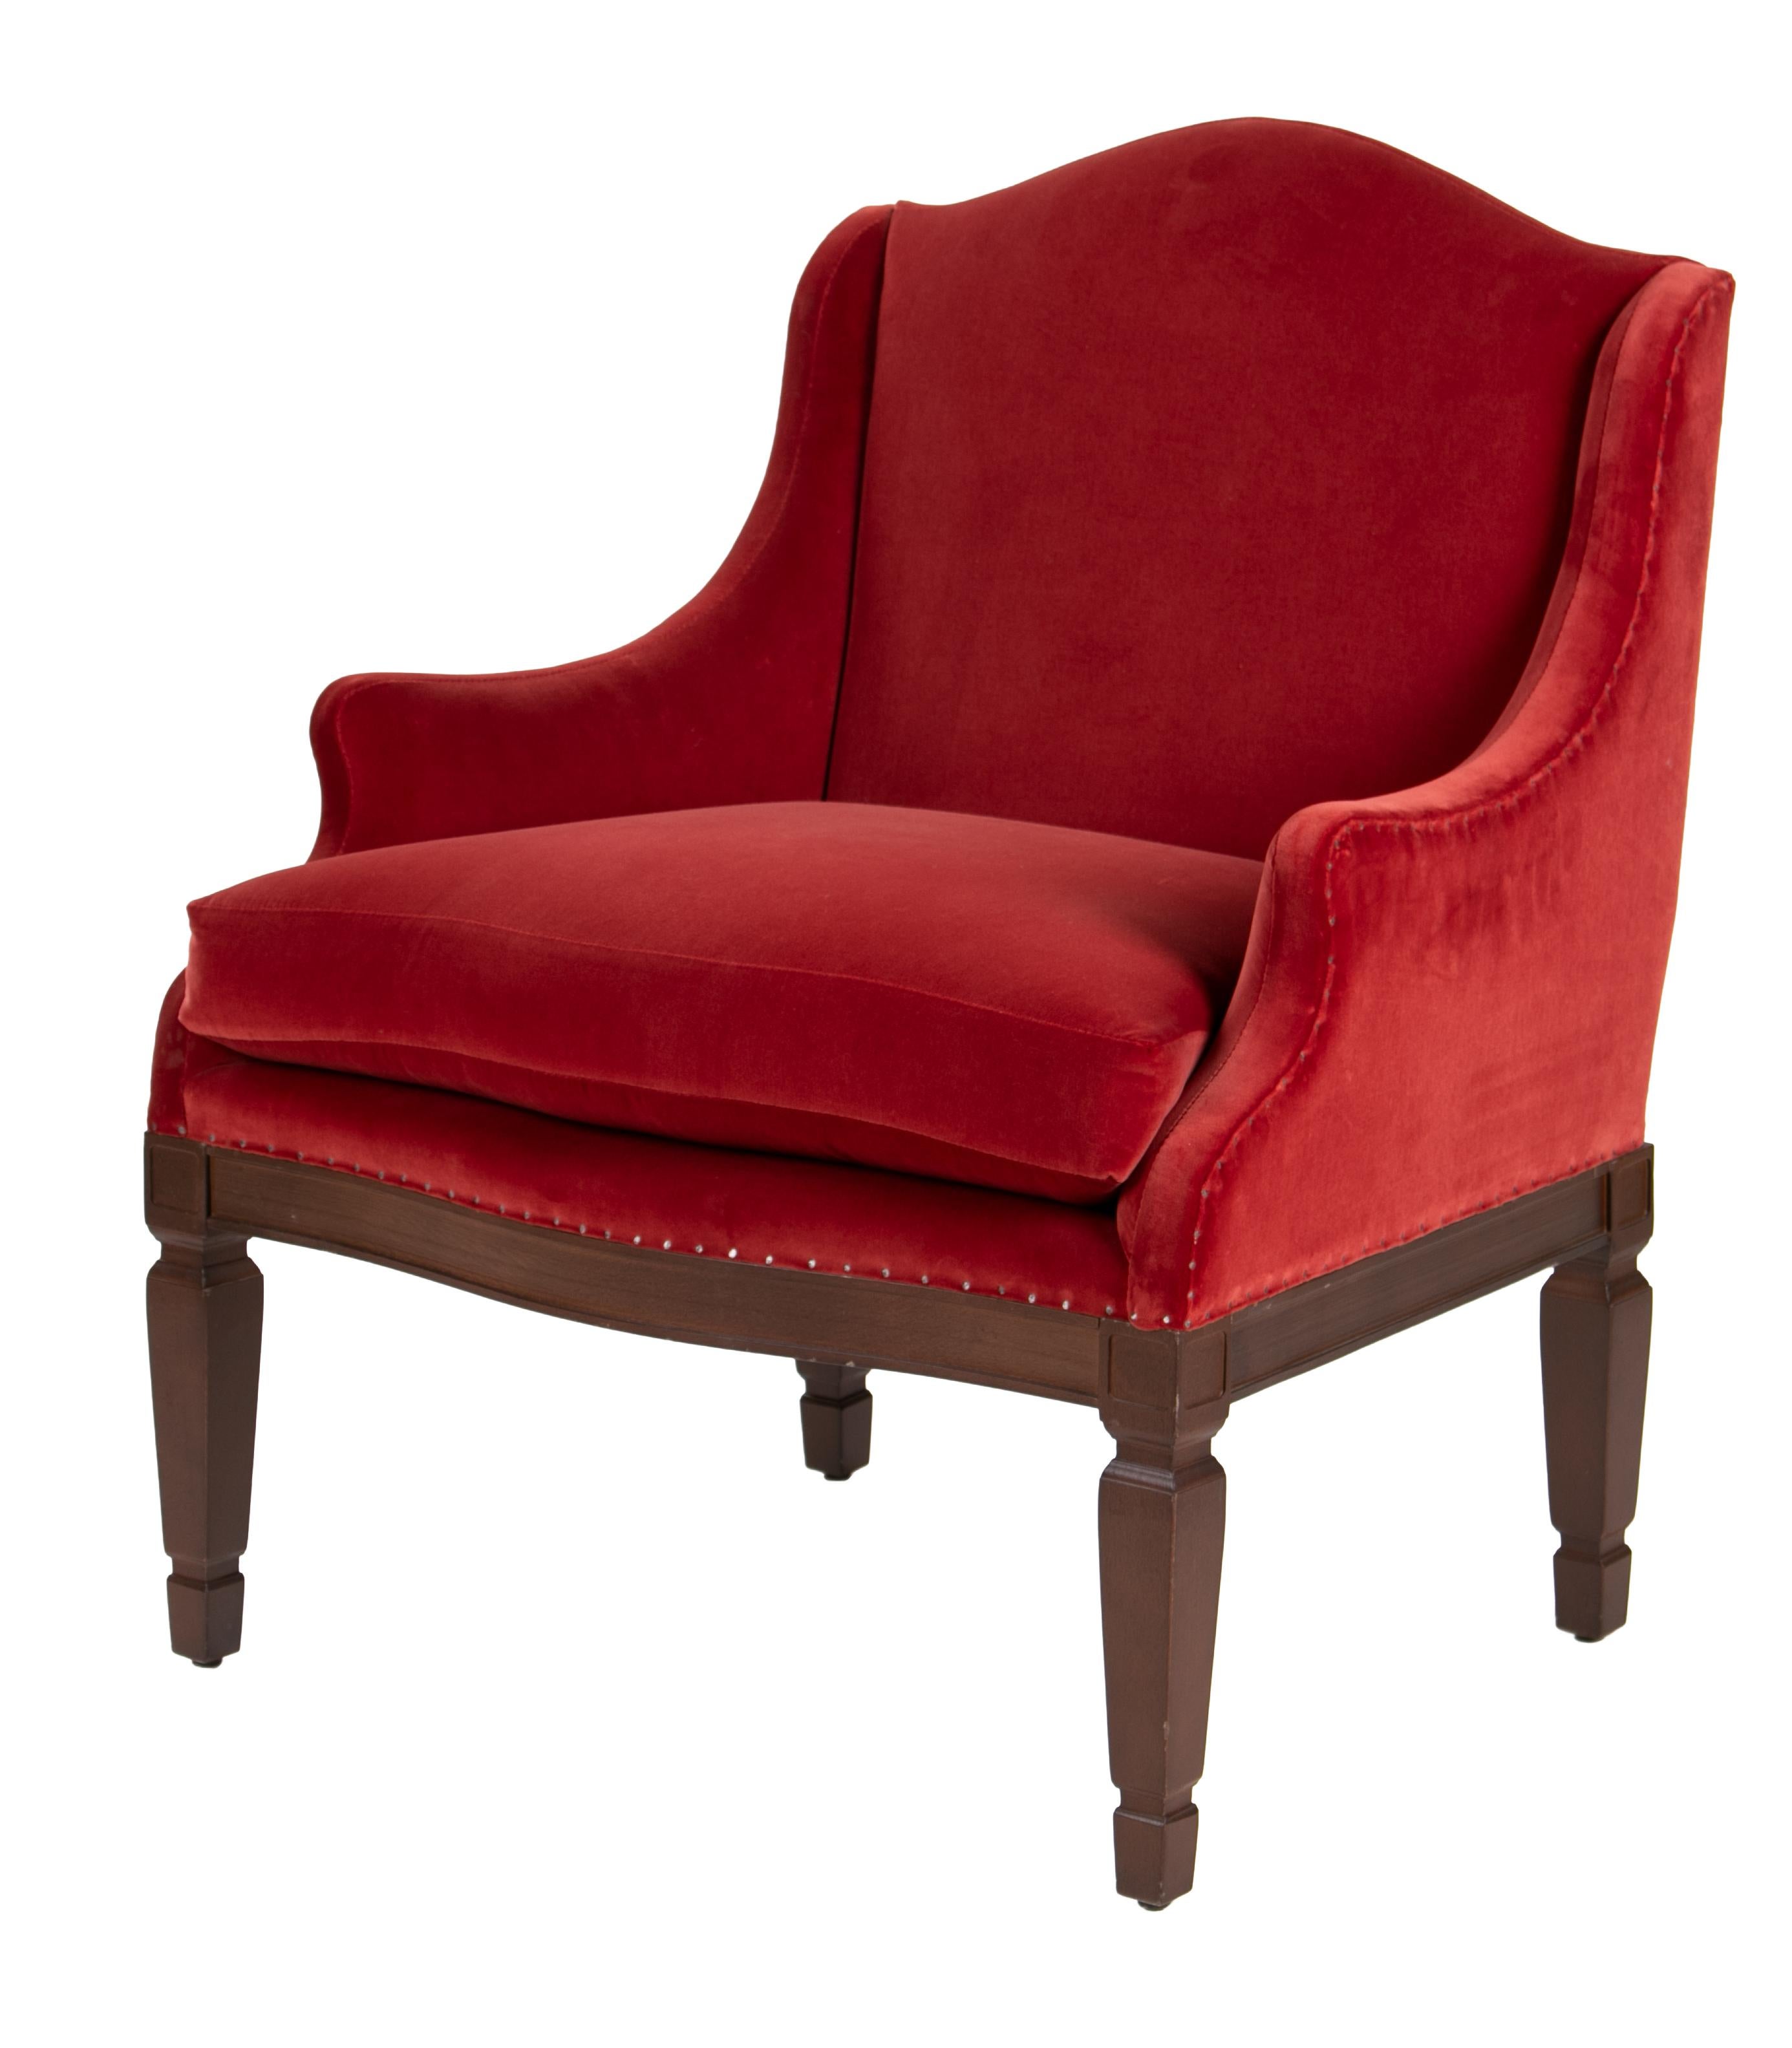 Spanish Set of Six Red Upholstered Wooden Armchairs